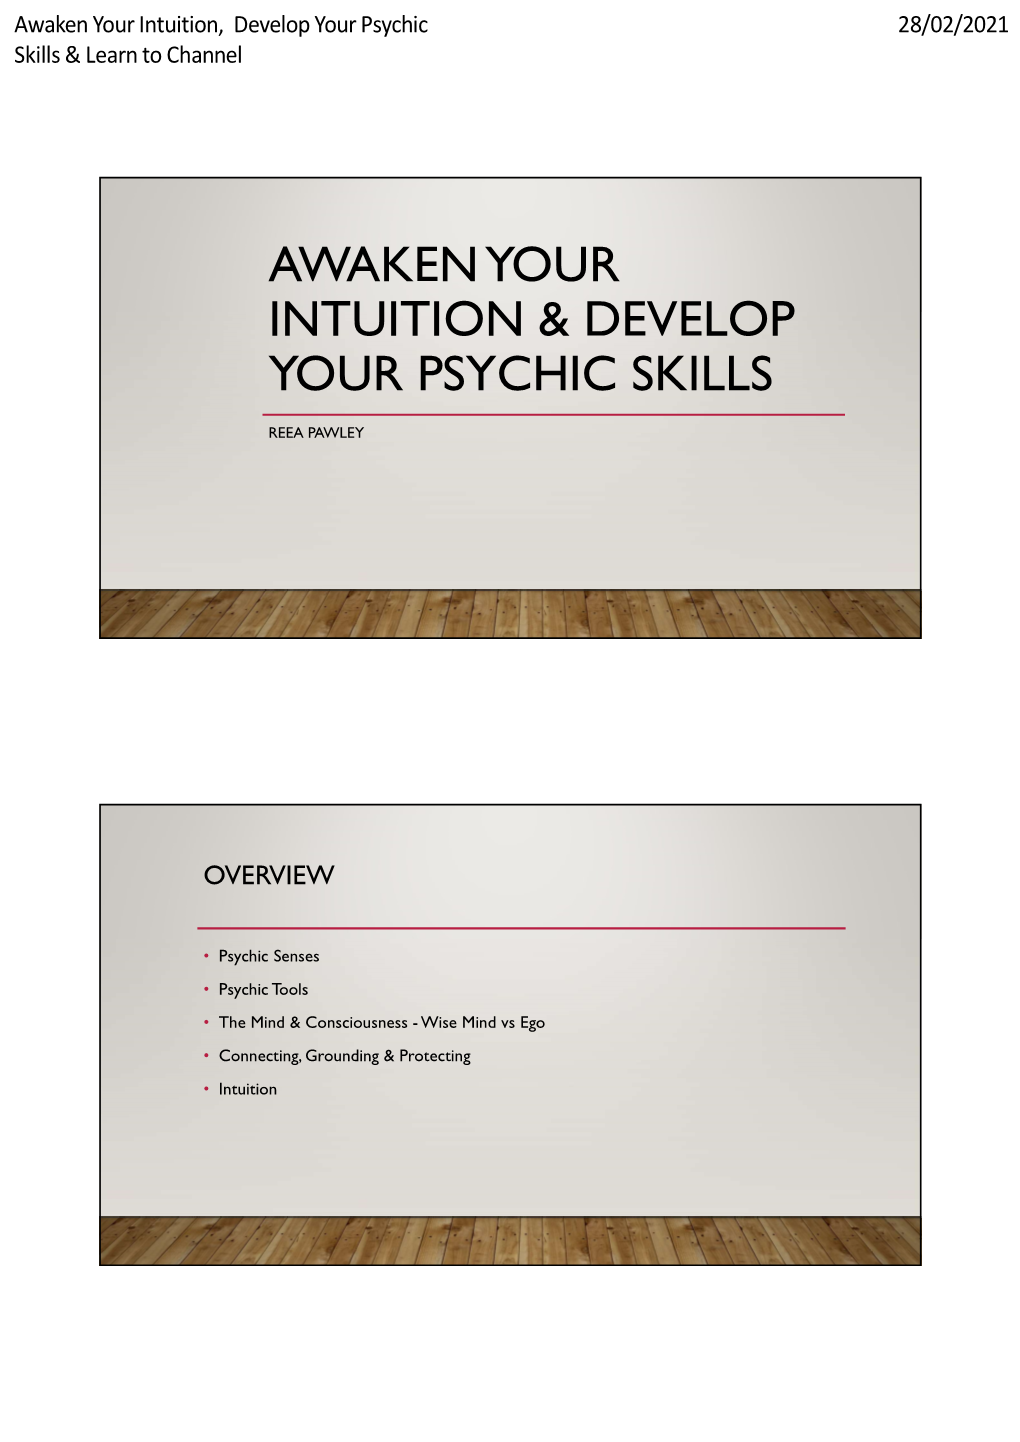 Awaken Your Intuition & Develop Your Psychic Skills